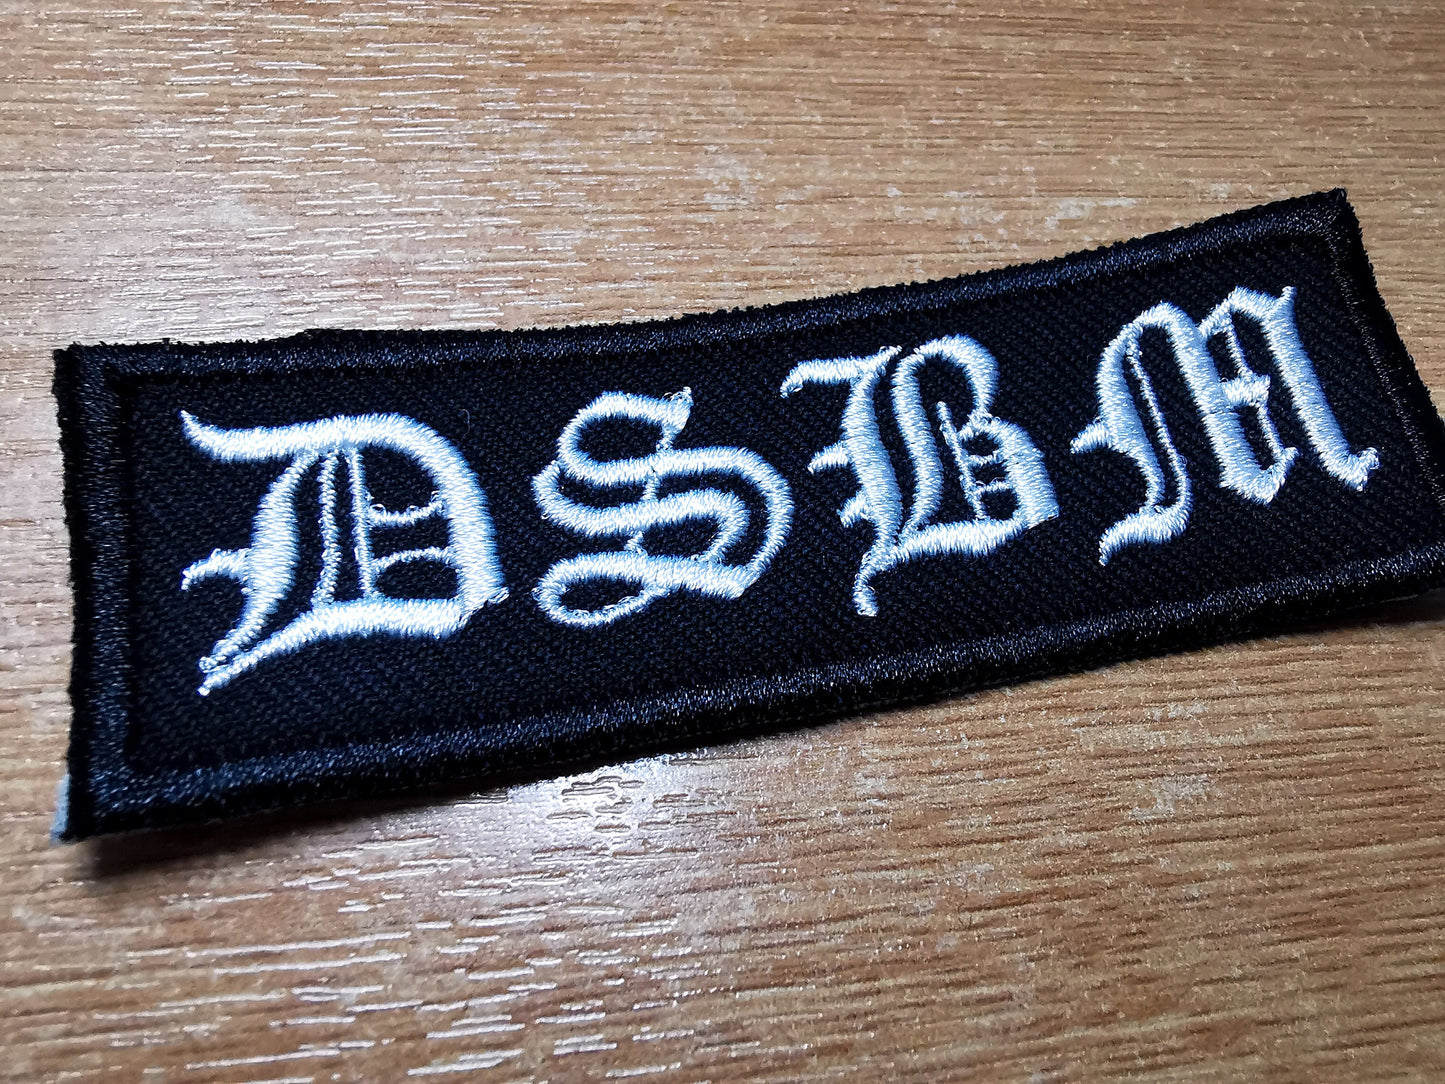 Depressive Black Metal Embroidered Patch DSBM Thy Light Iron on Patch